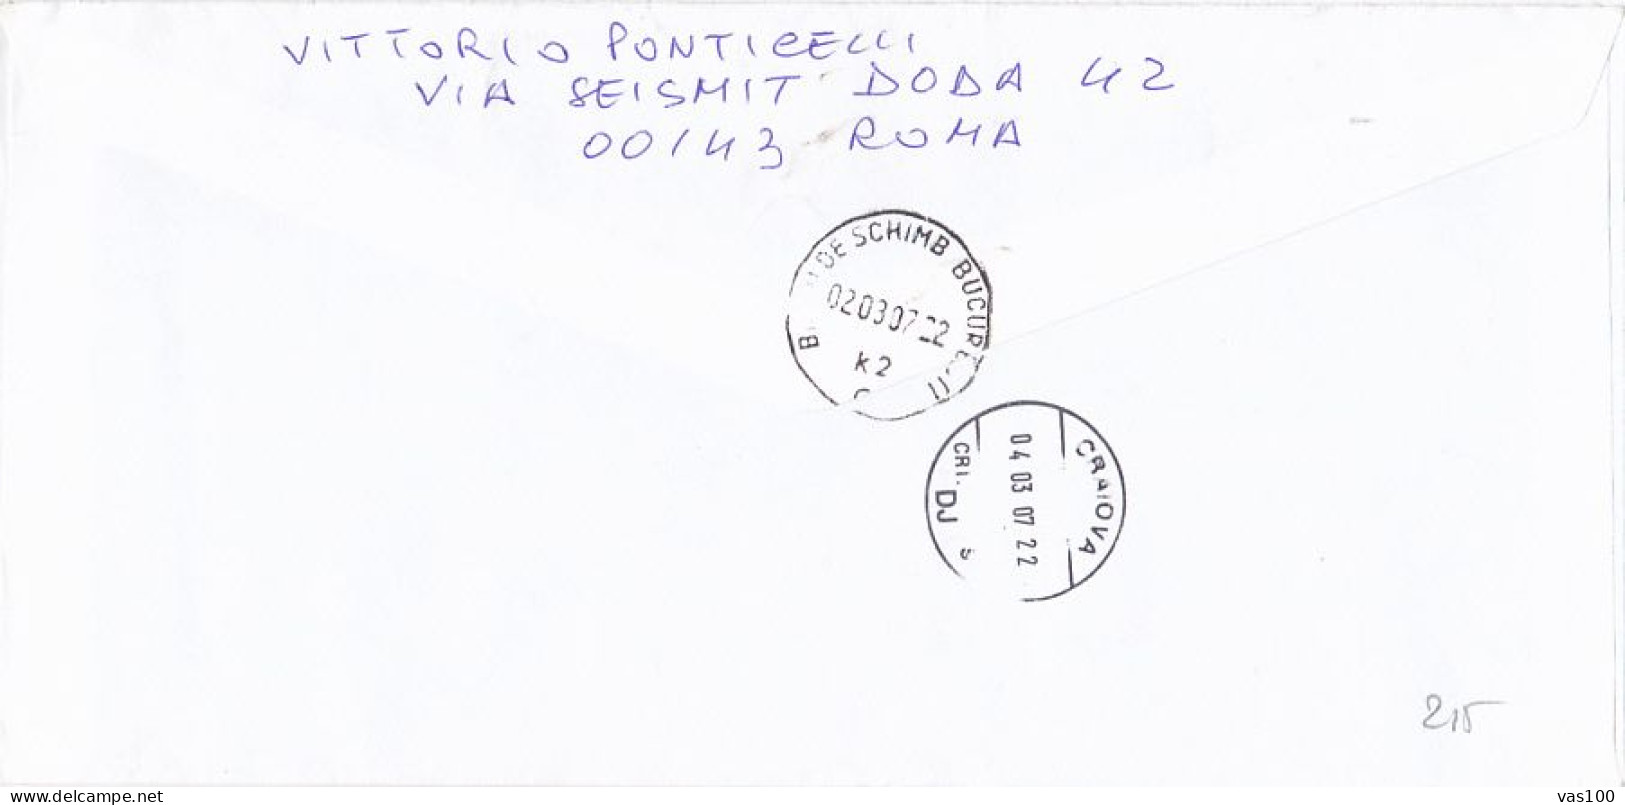 POPES, SAN PIETRO SQUARE AND BASILICA, FINE STAMPS ON REGISTERED COVER, 2007, VATICAN - Covers & Documents